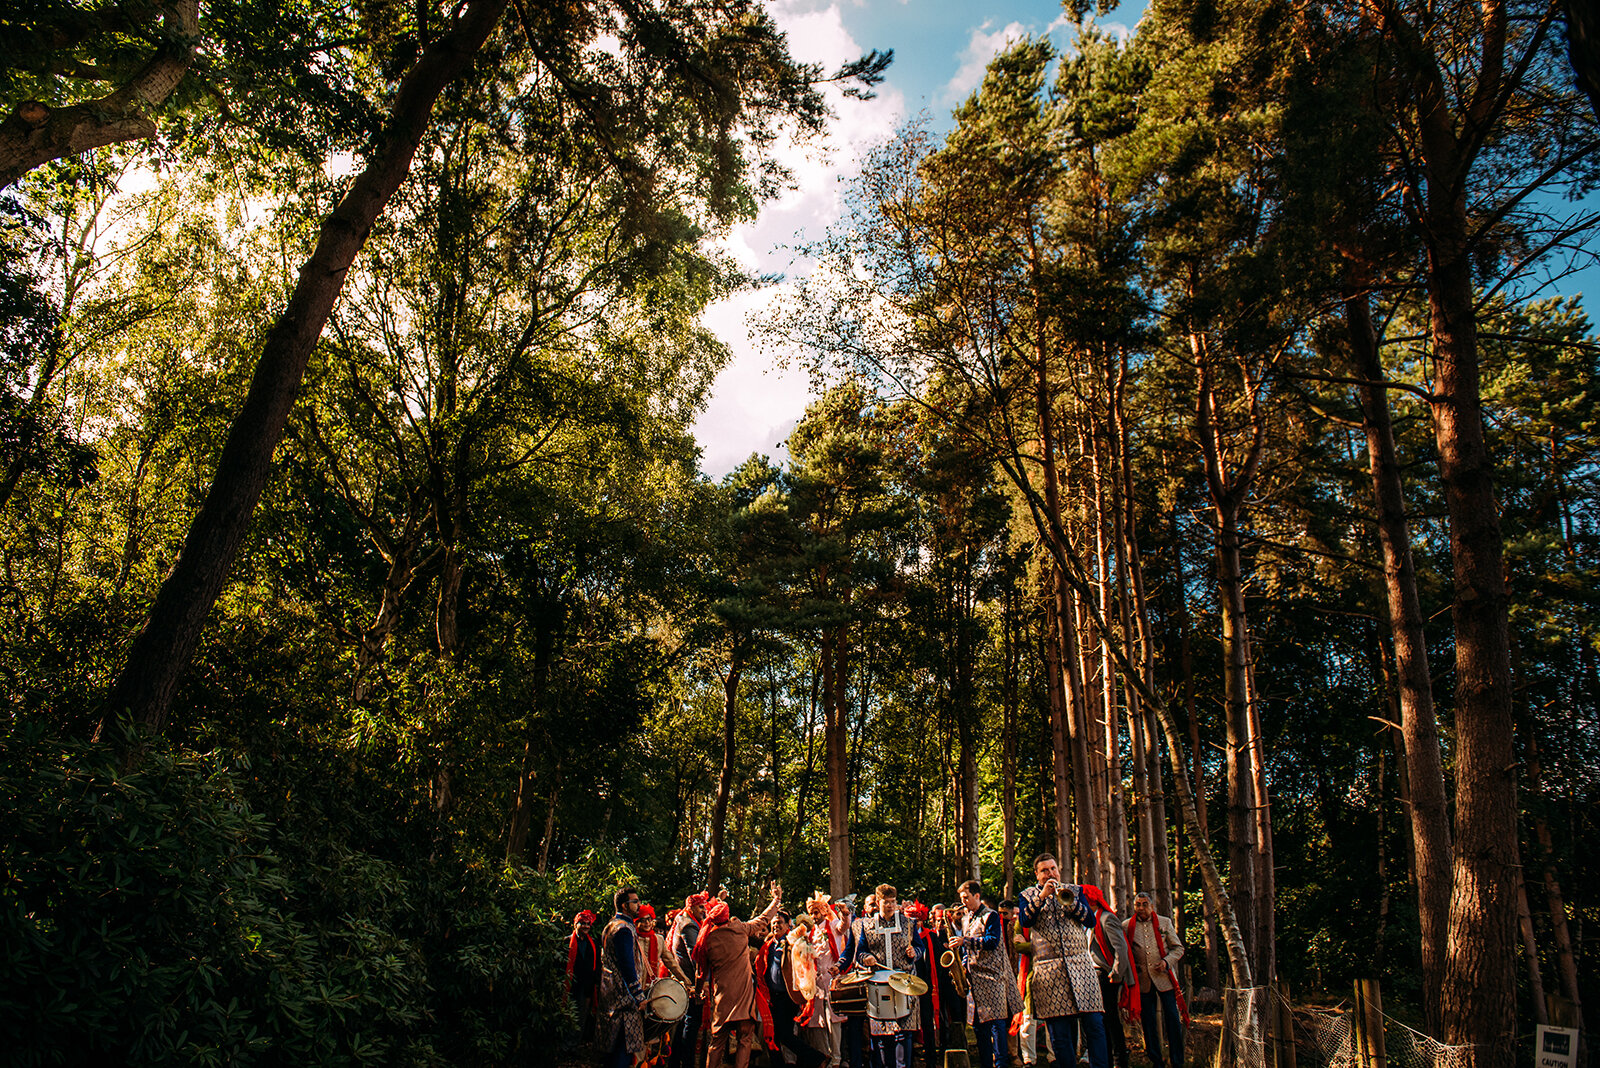  Groom procession through the woods 